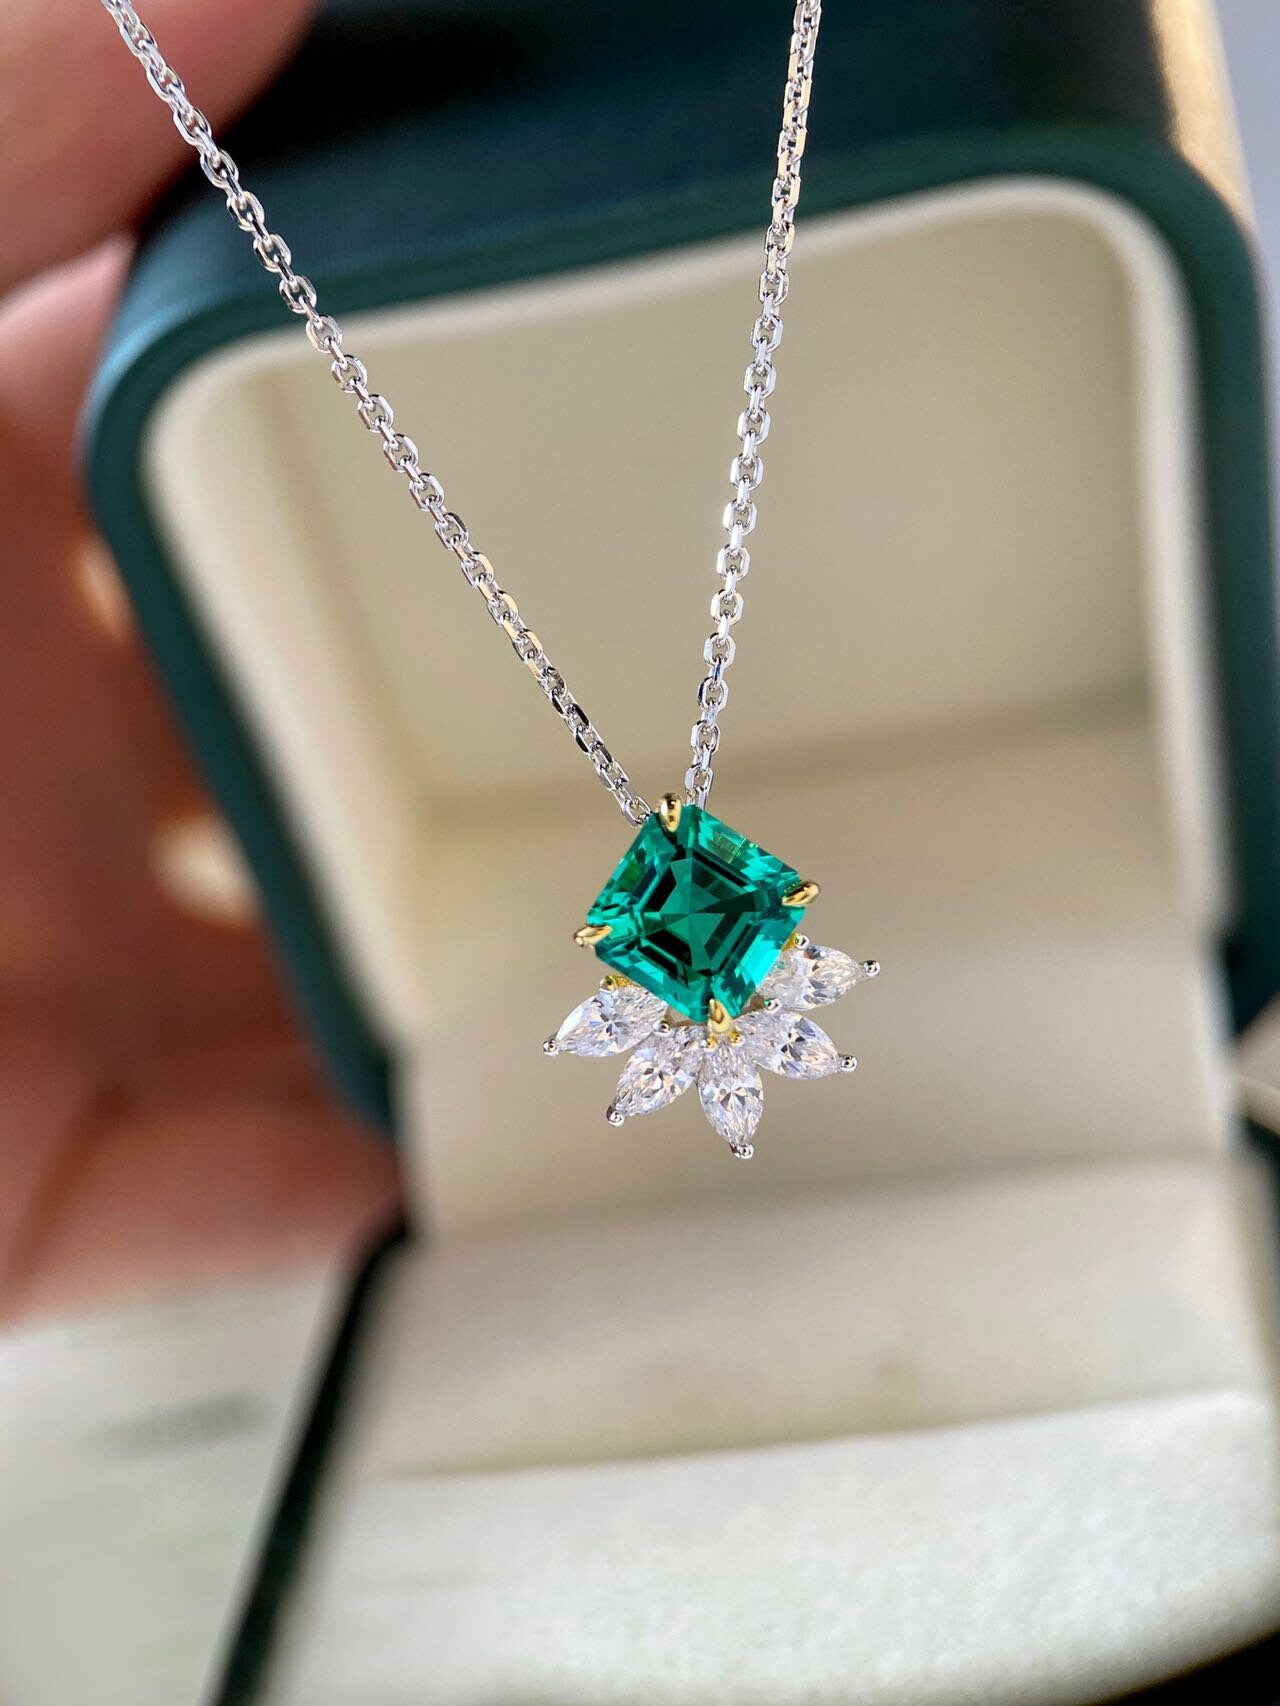 TOP Quality Colombia Emerald Necklace 2.25CT VVG Color S925 - Etsy